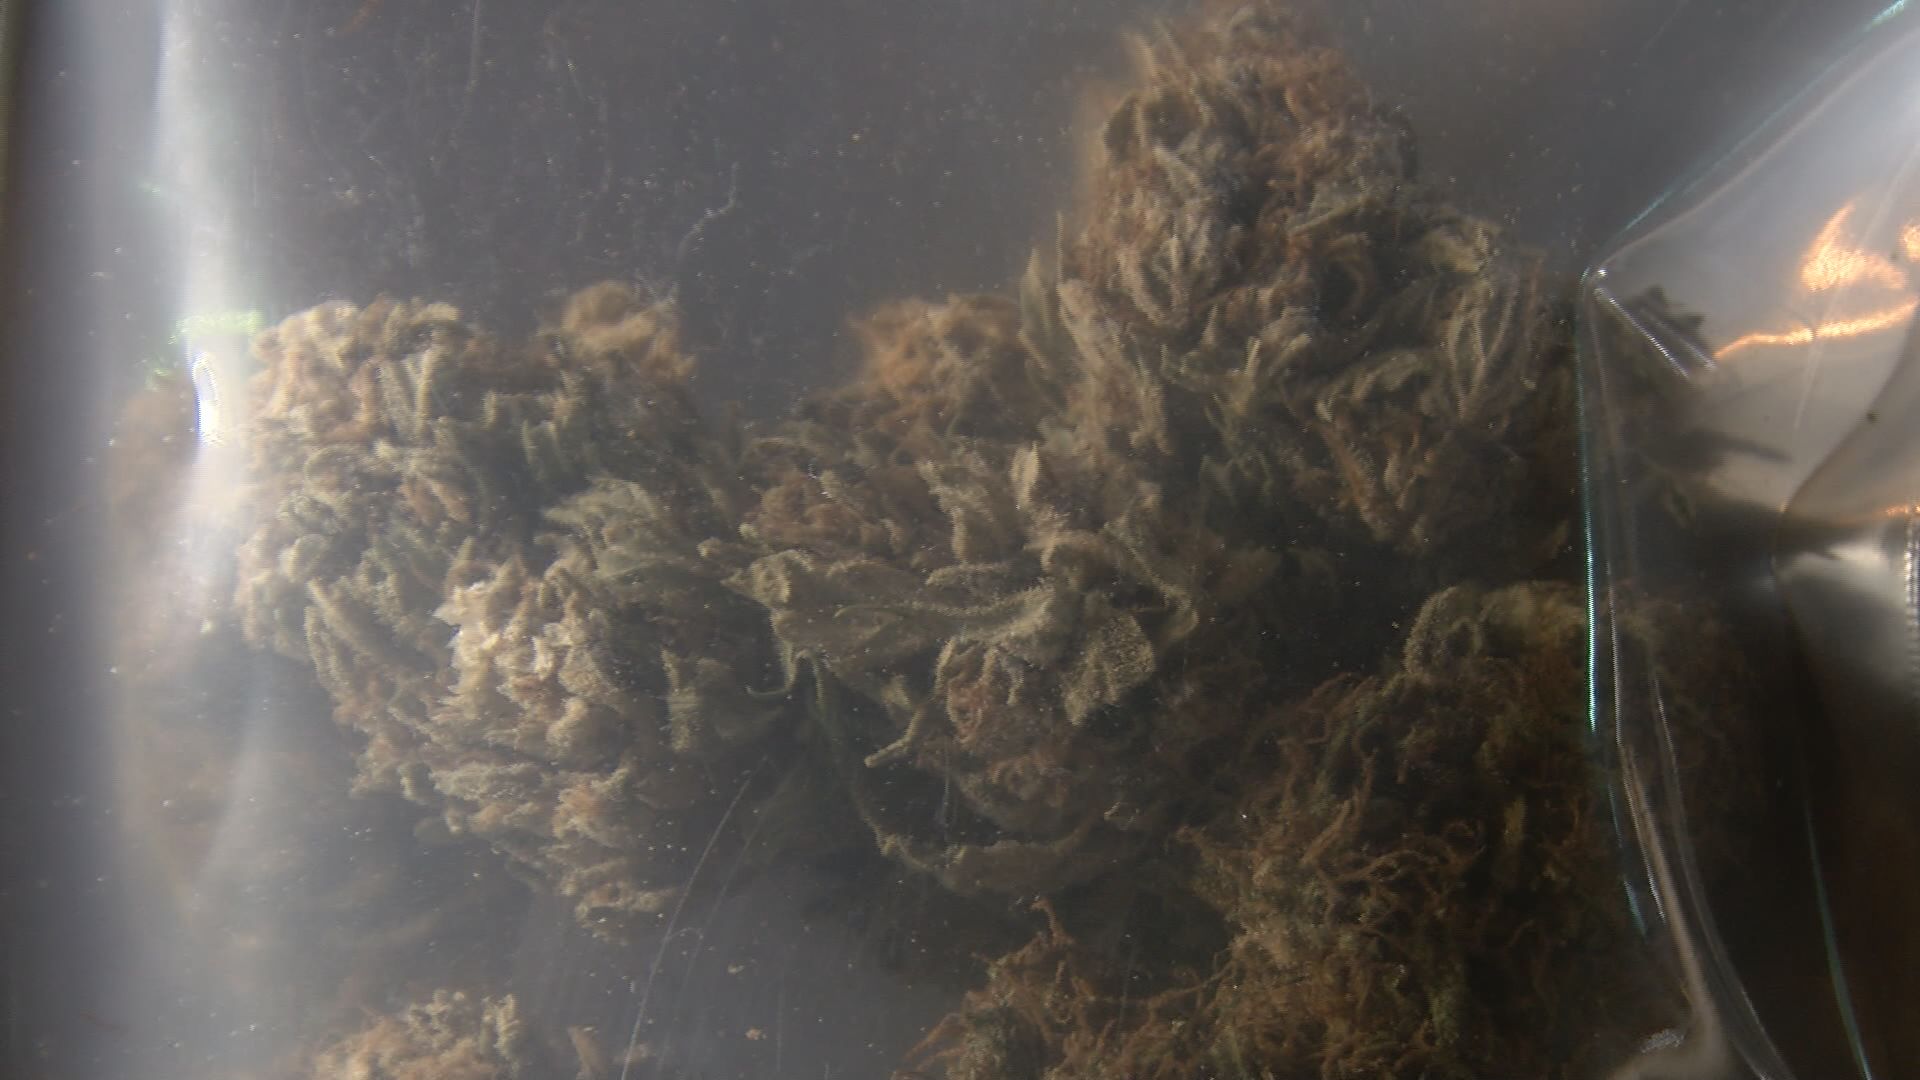 Growing weed at home in Minnesota: Your questions answered - CBS